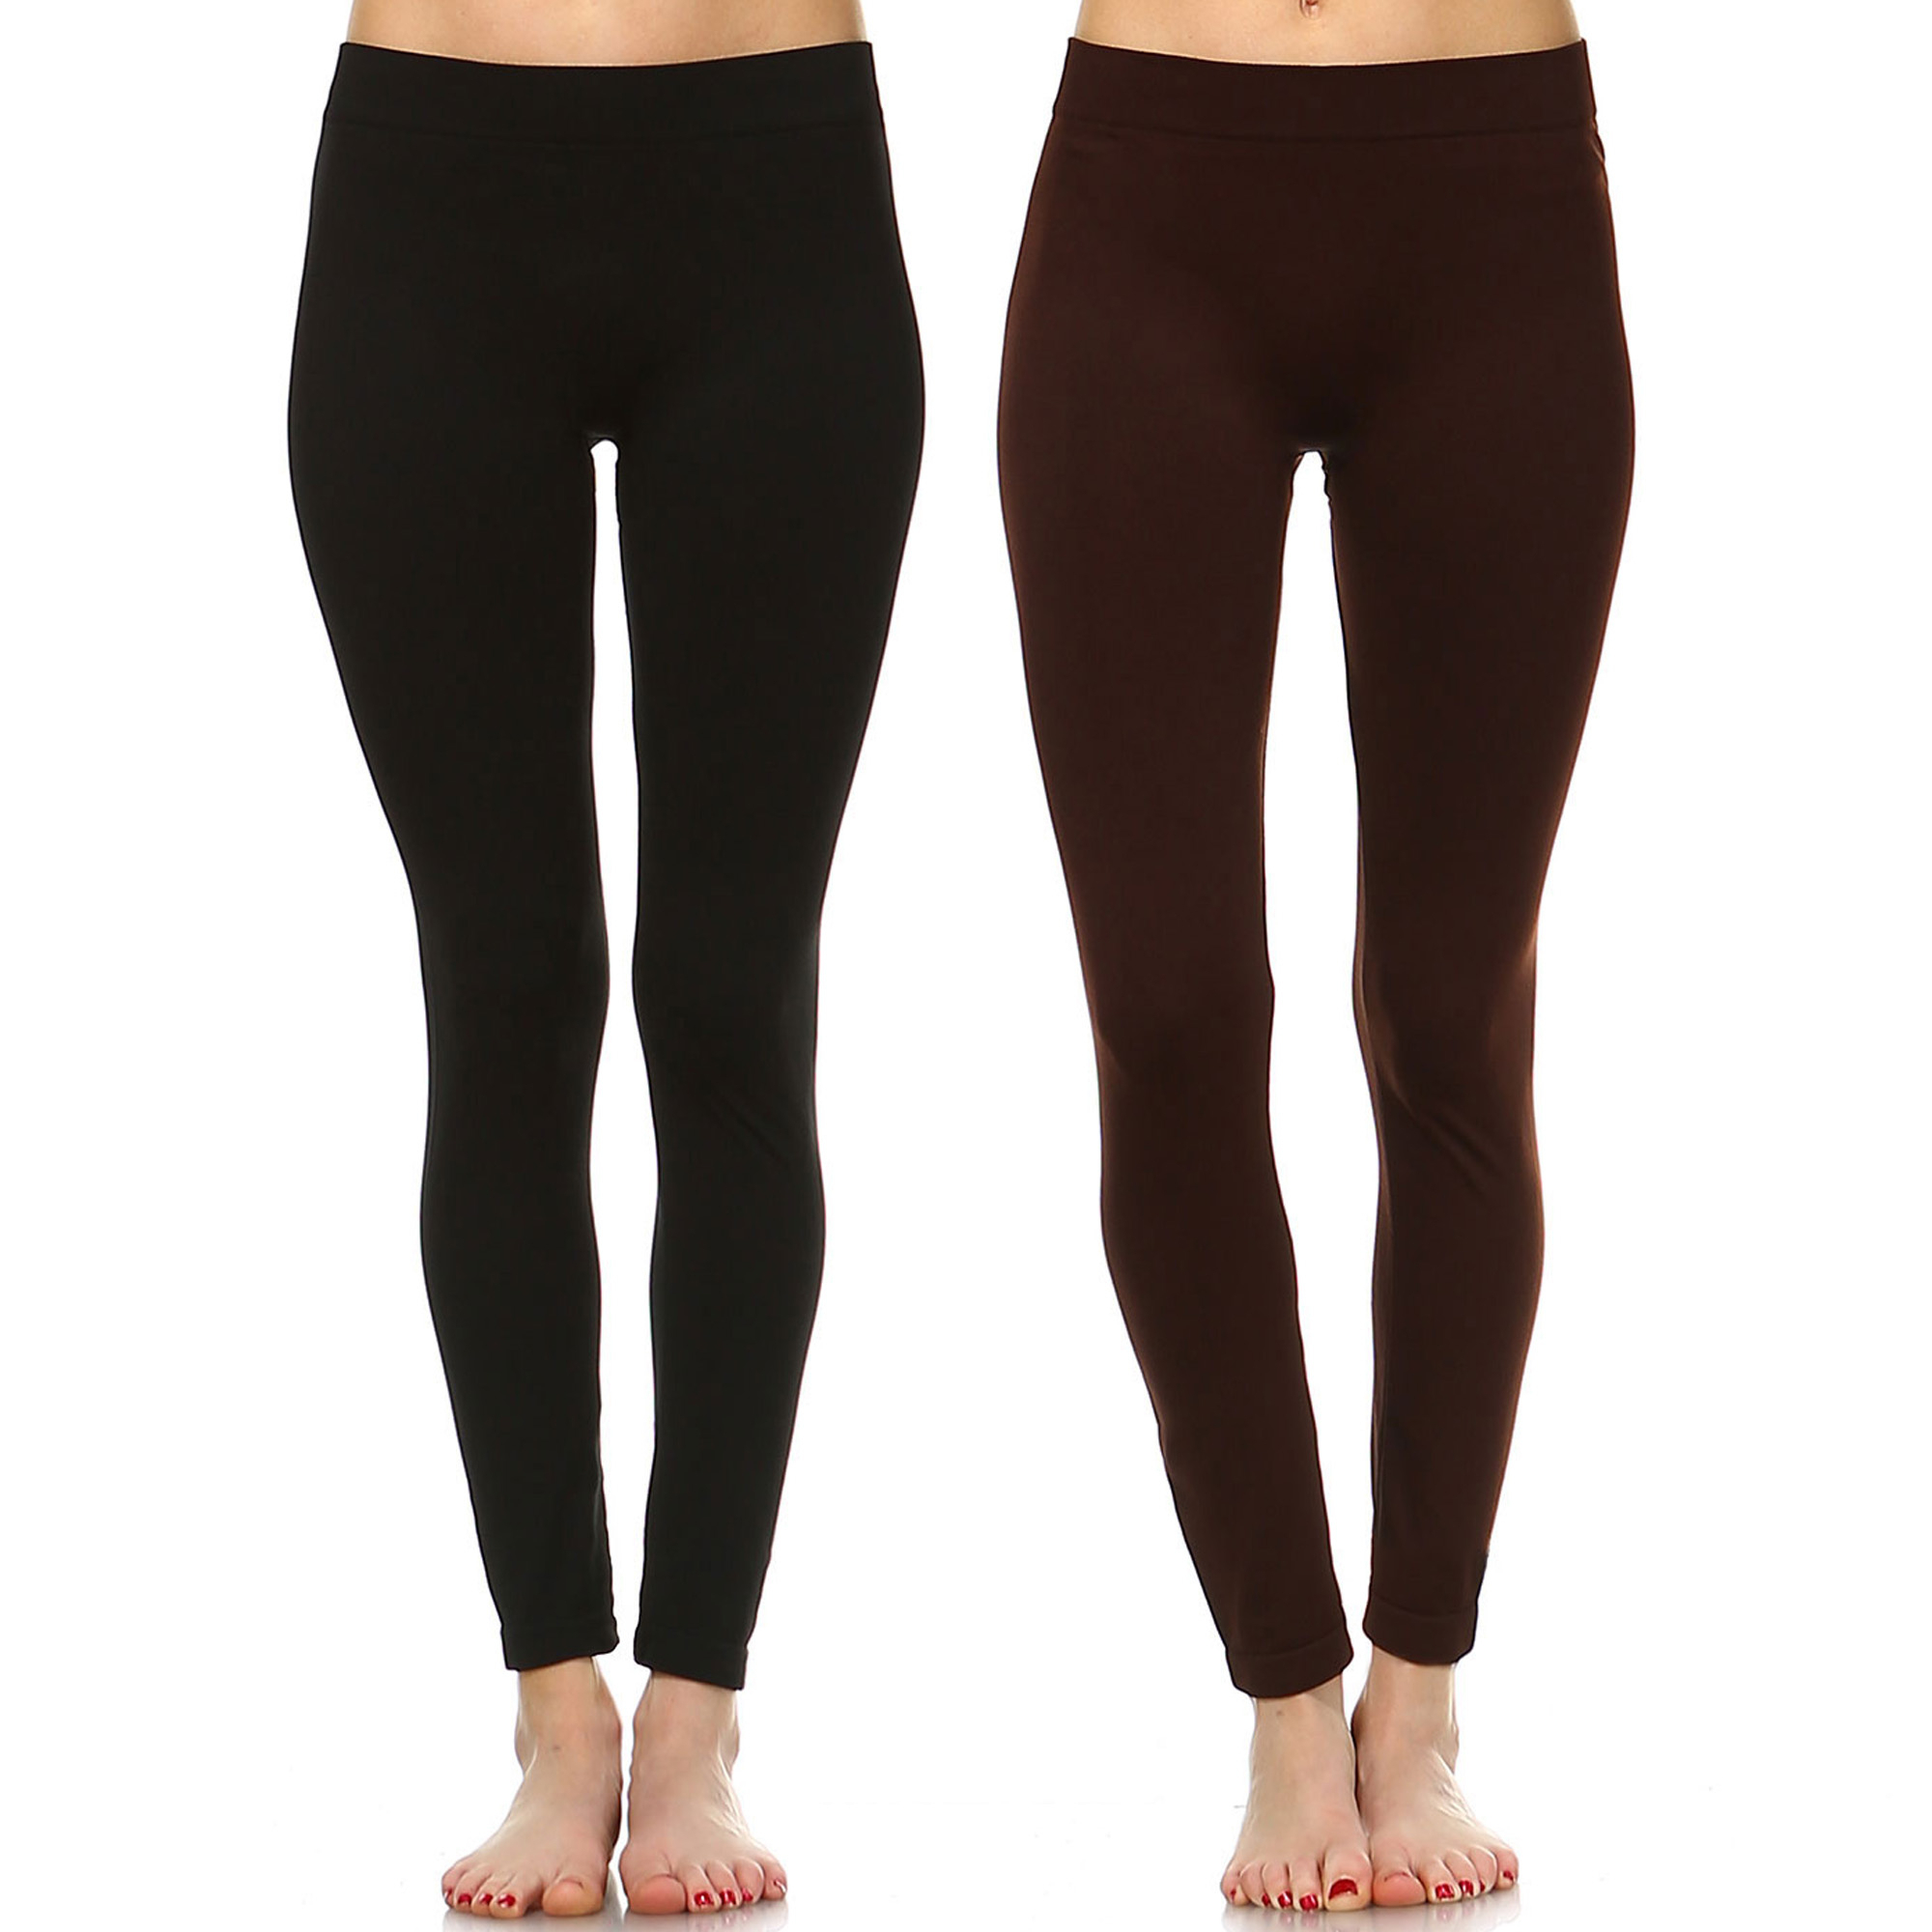 White Mark Women's Pack Of 2 Solid Color Leggings - Black, Red, One Size - Missy